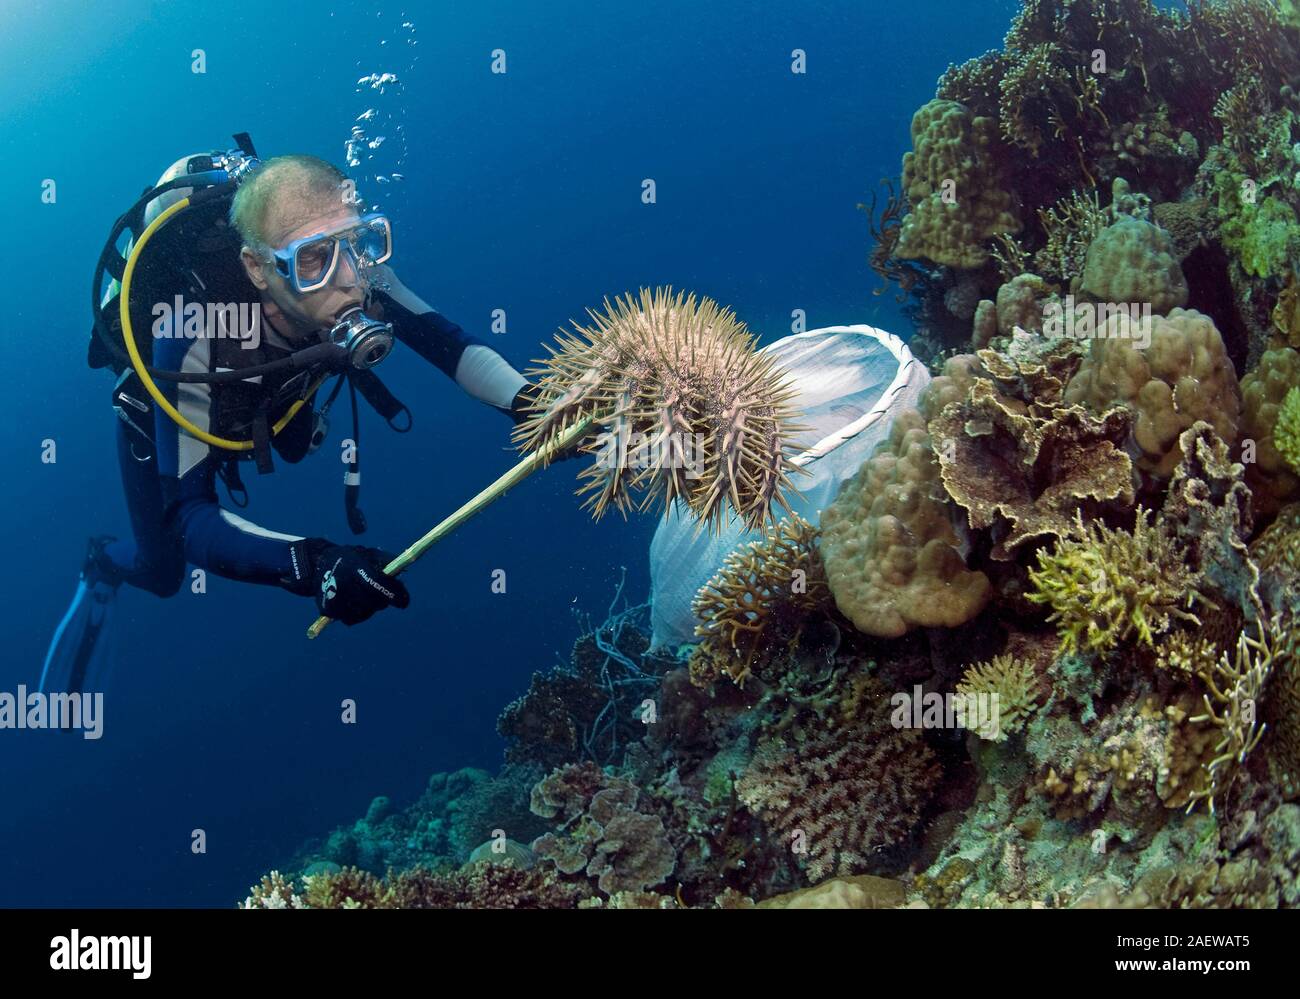 Scuba diver collect and remove Crown of thorns starfishes (Acanthaster planci) which can destroy an entire coral reef, Moalboal, Cebu, Philippines Stock Photo